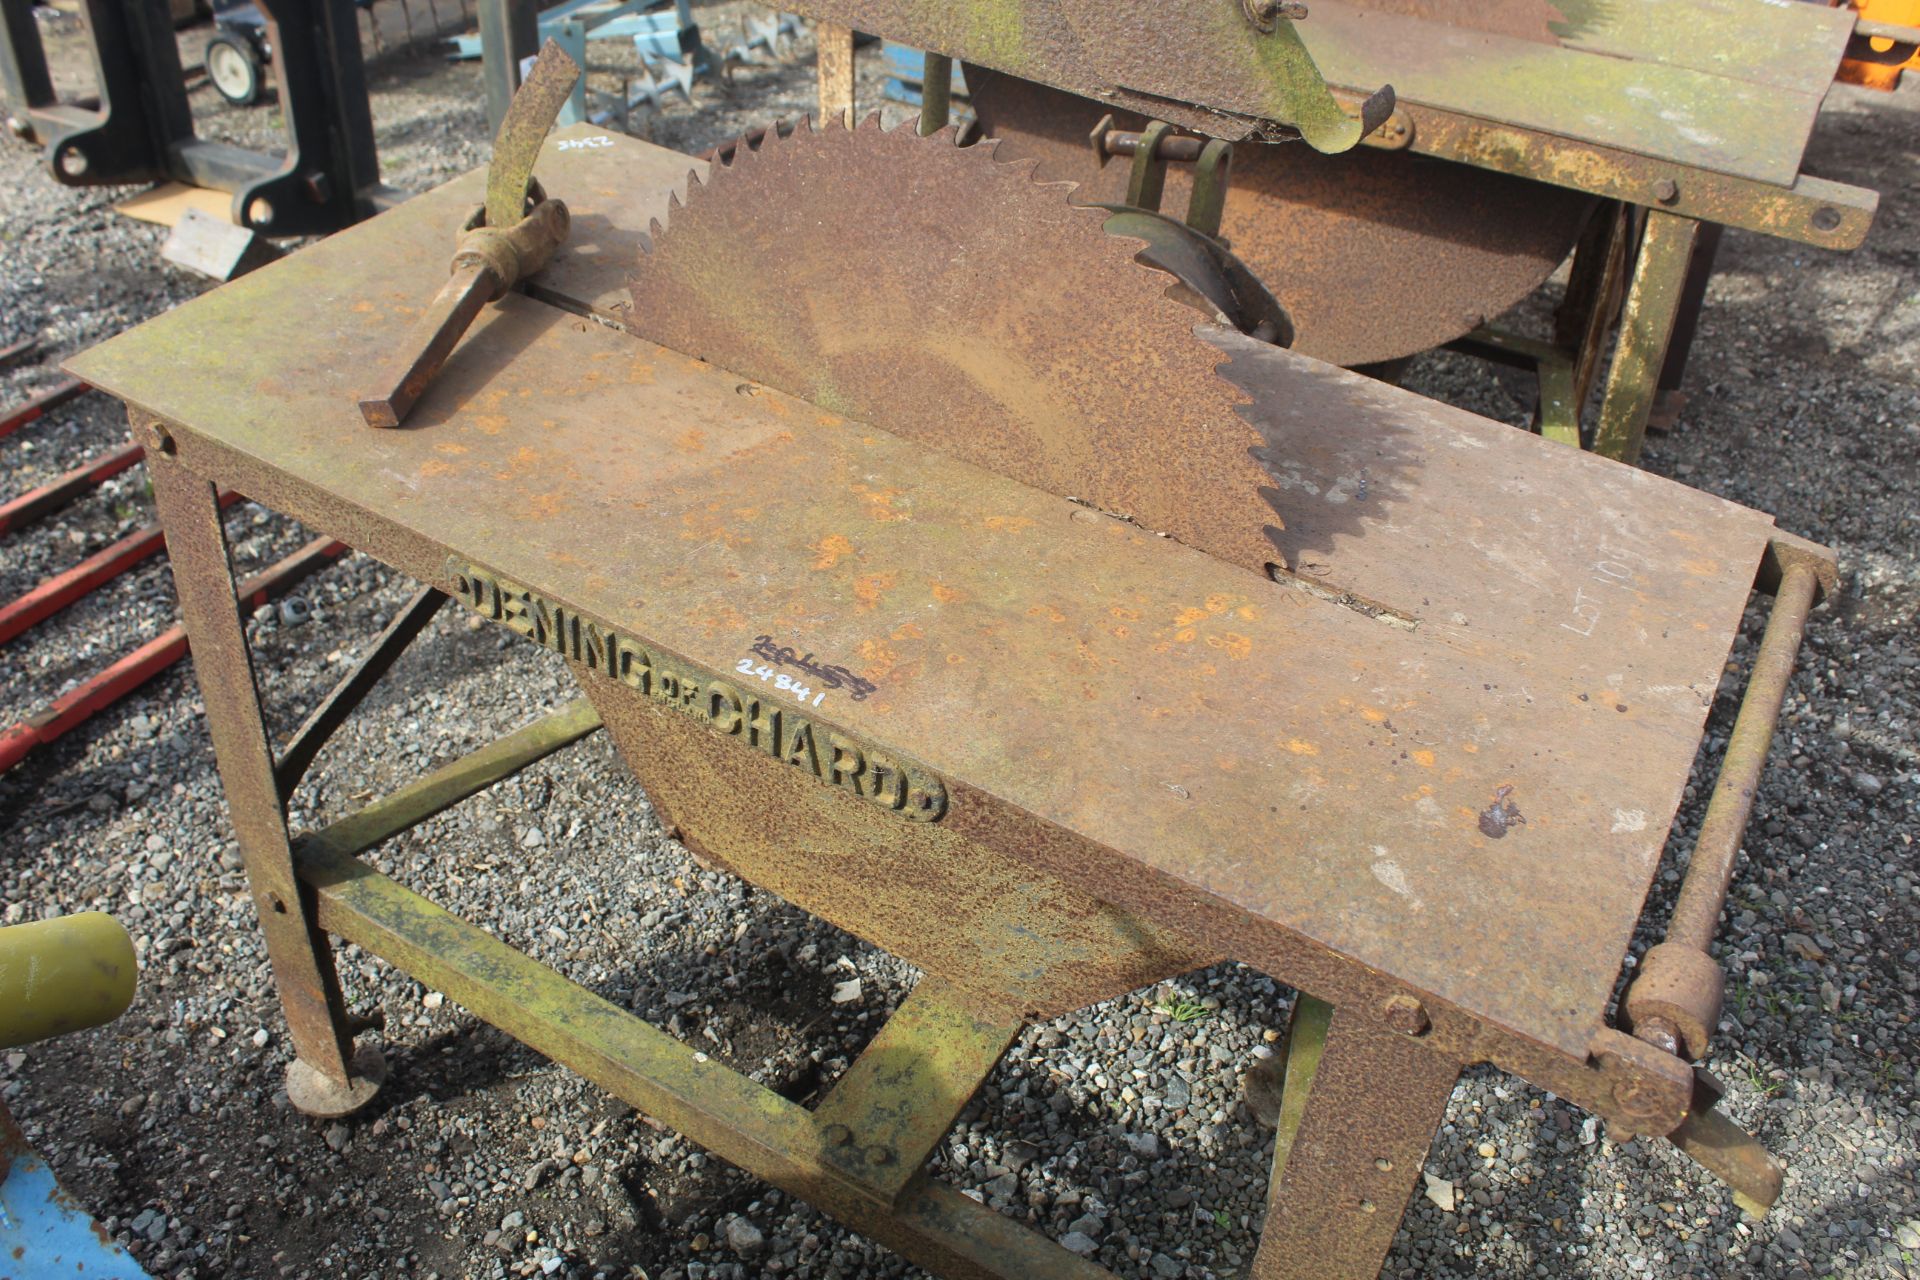 Dening of Chard PTO saw bench. - Image 7 of 8